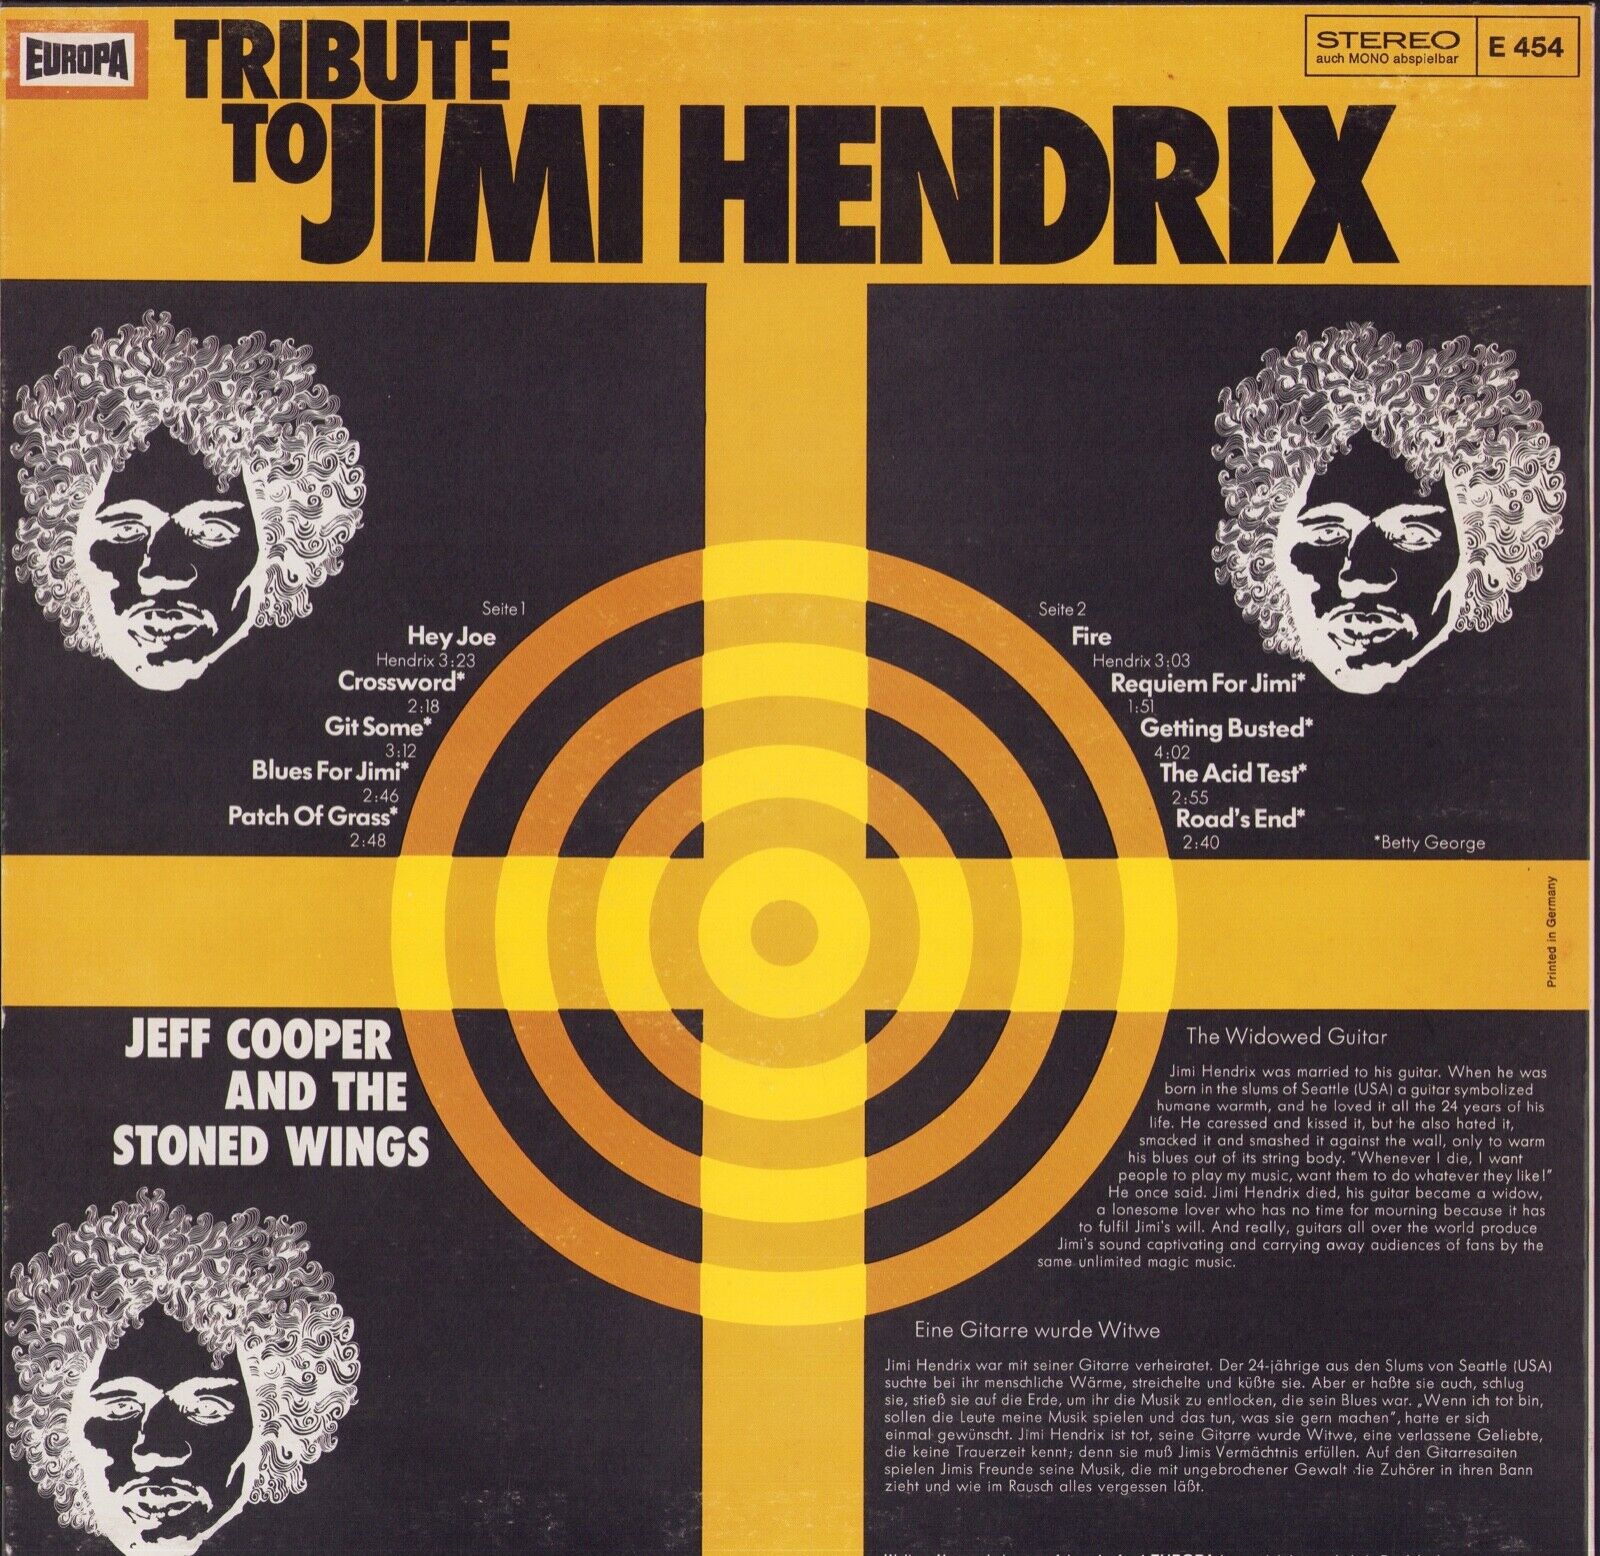 Jeff Cooper And The Stoned Wings ‎- Tribute To Jimi Hendrix Vinyl LP